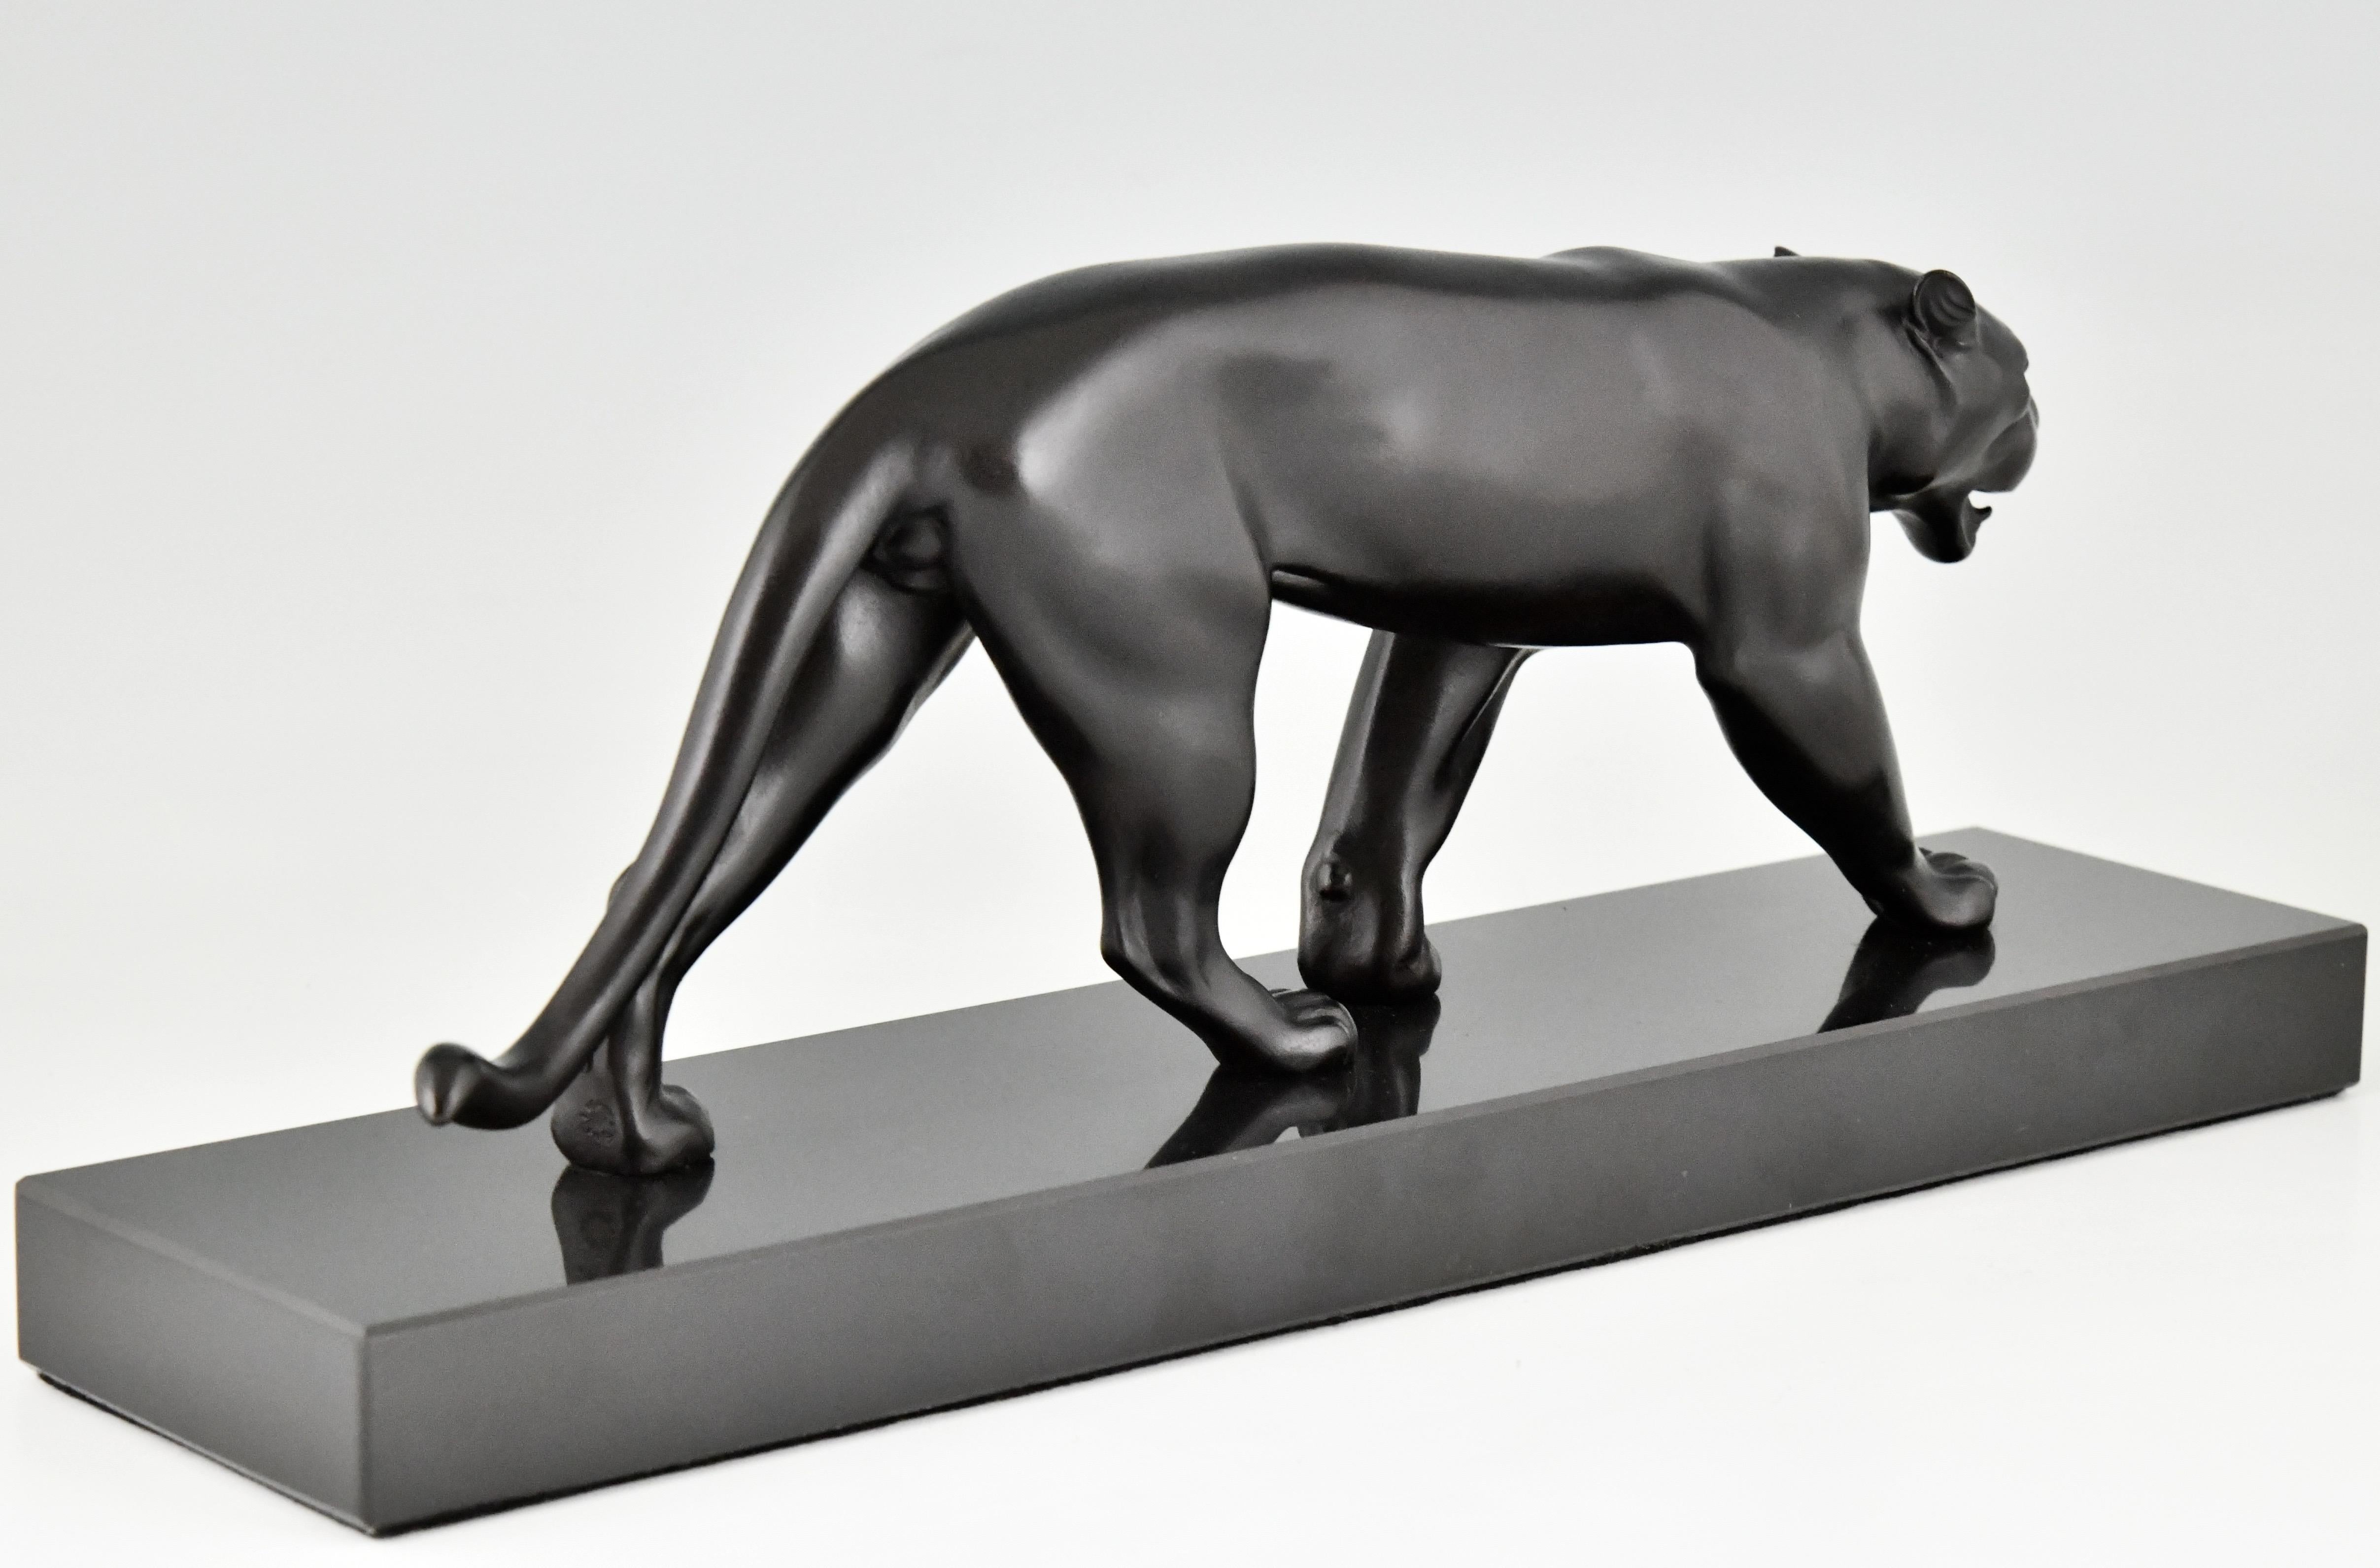 Contemporary Art Deco Style Panther Sculpture OUGANDA by Max Le Verrier, France For Sale